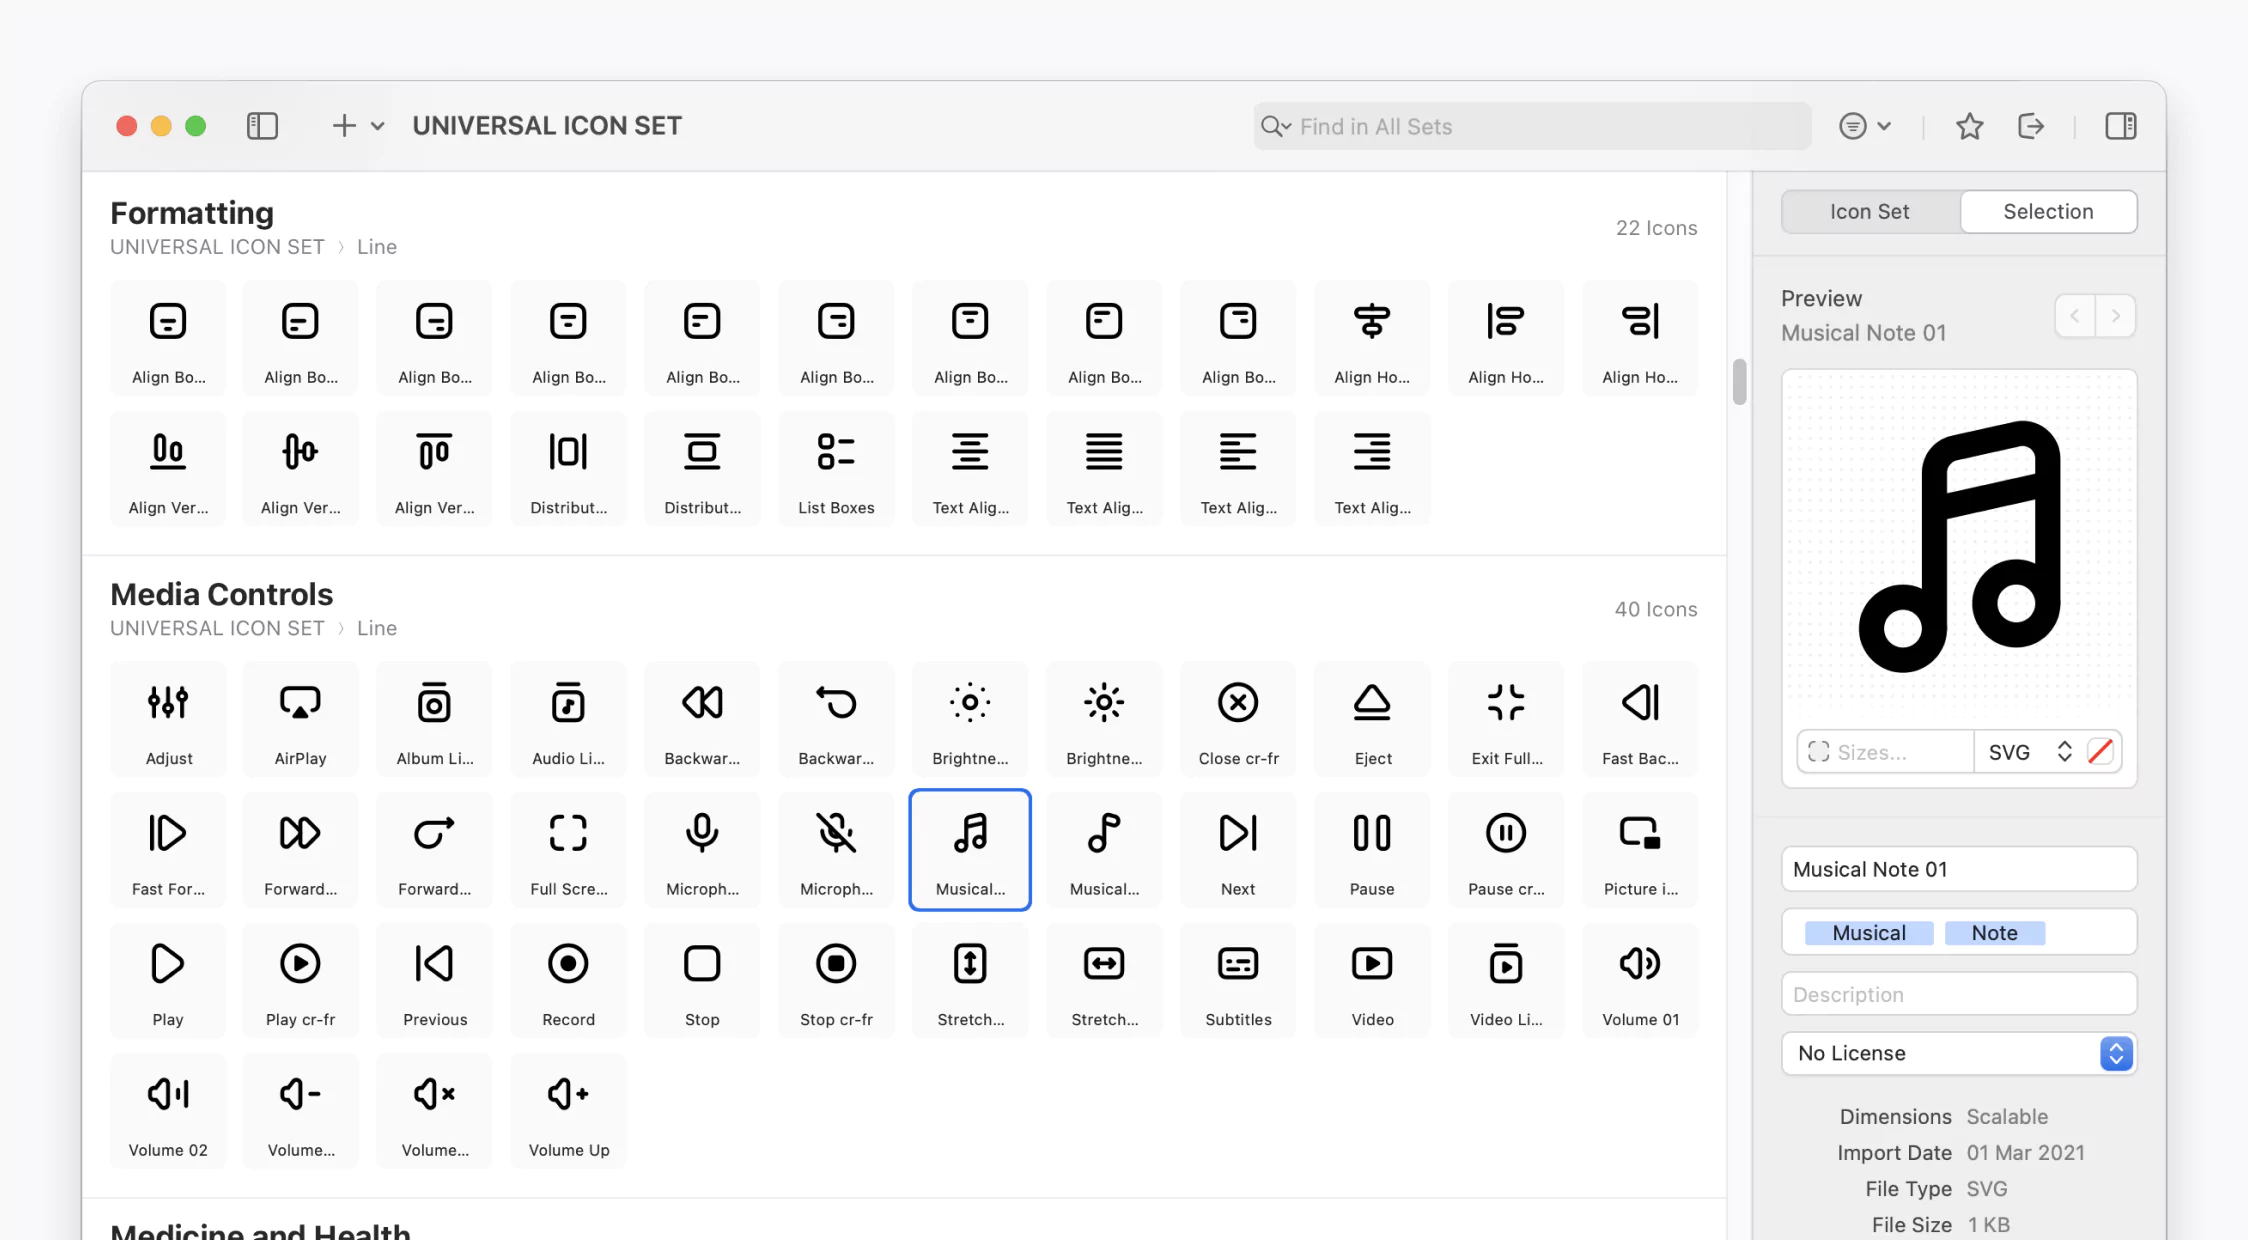 A screenshot of the IconJar interface showing the Universal Icon Set. Categories include Formatting and Media Controls.